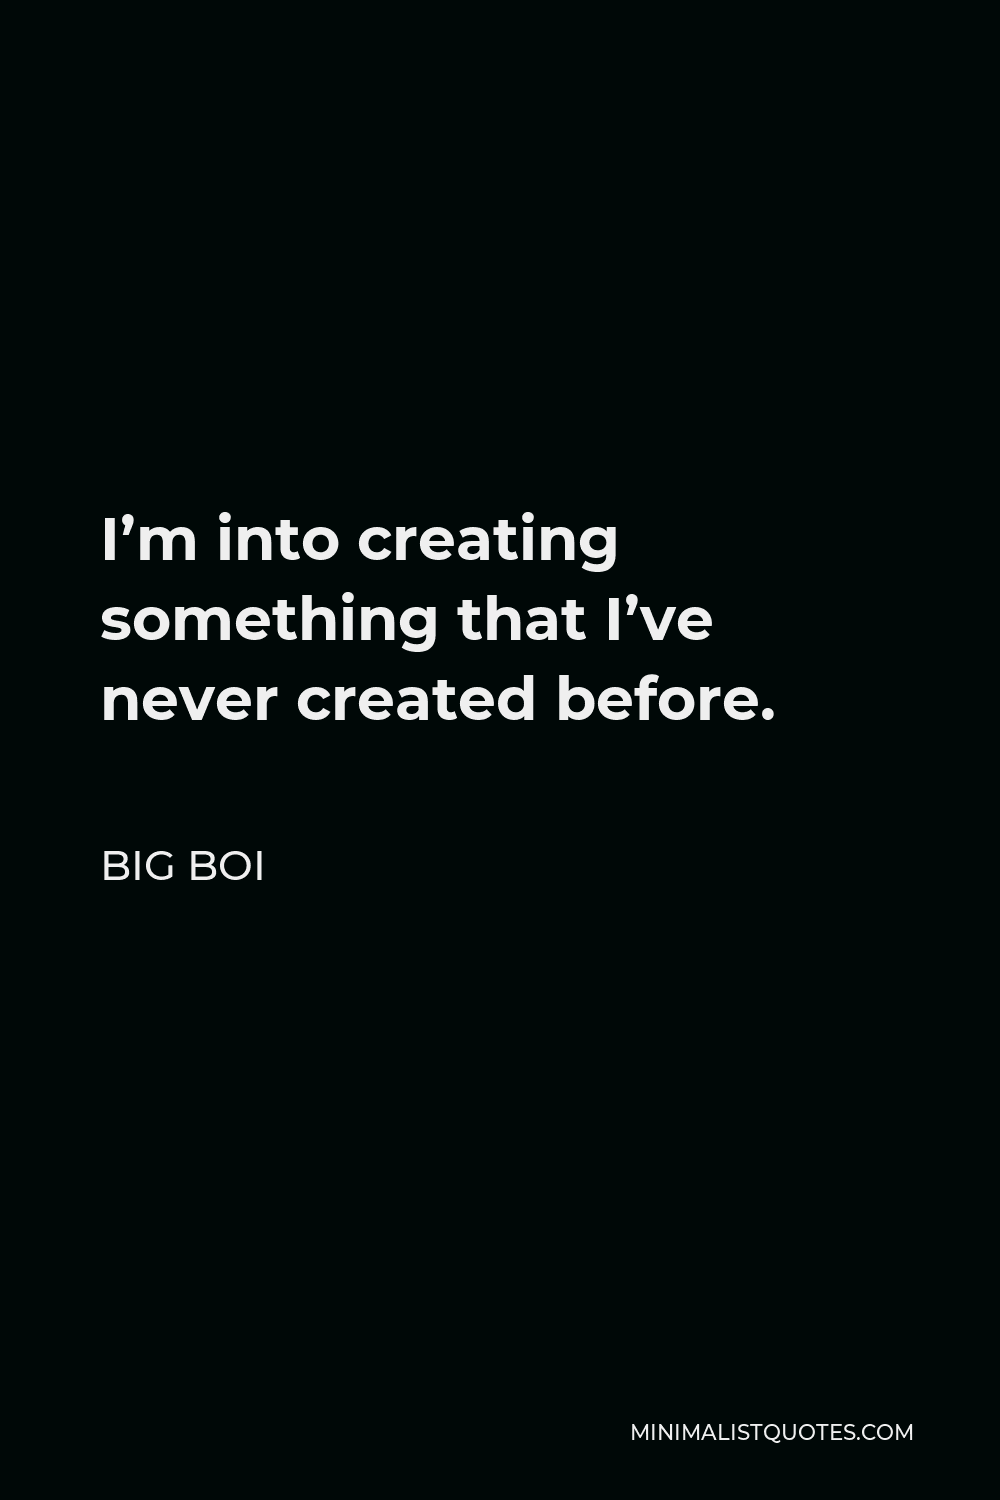 Big Boi Quote - I’m into creating something that I’ve never created before.